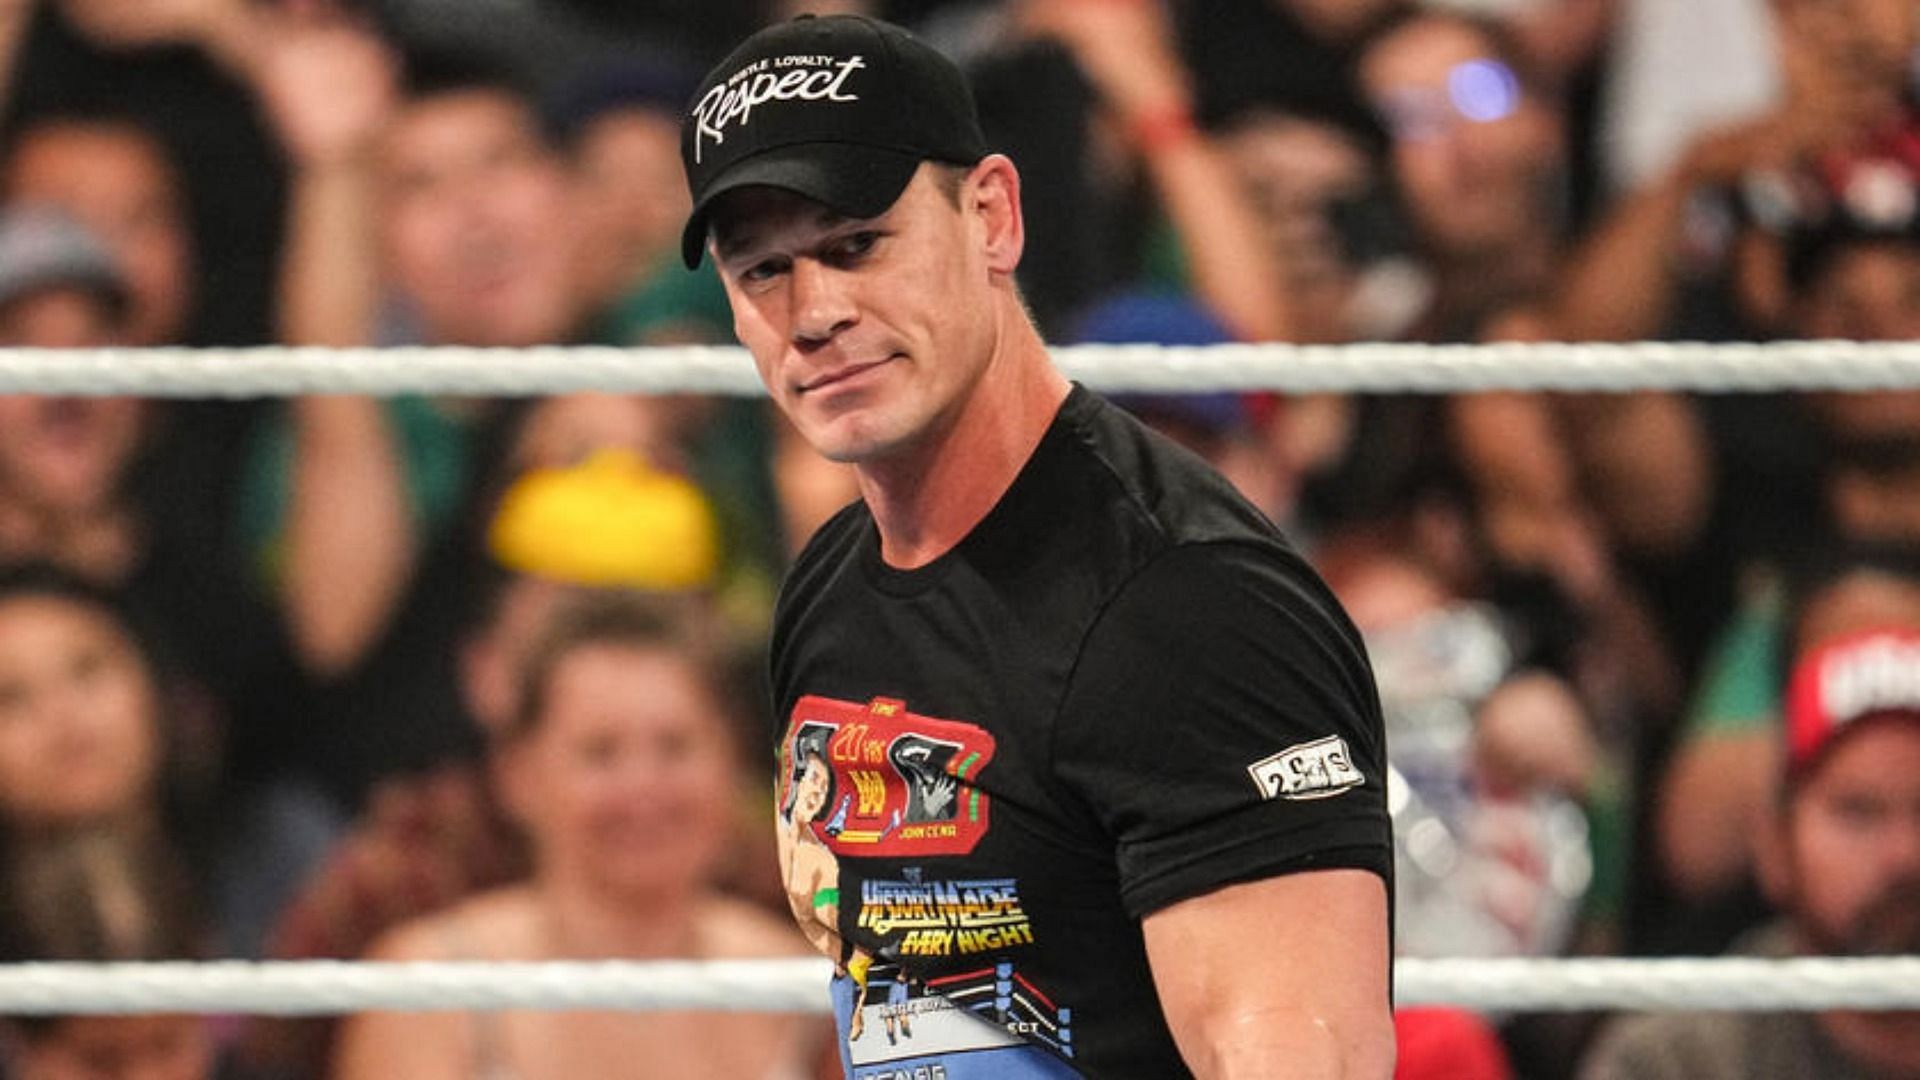 John Cena is set to wrestle his first match in more than a year.